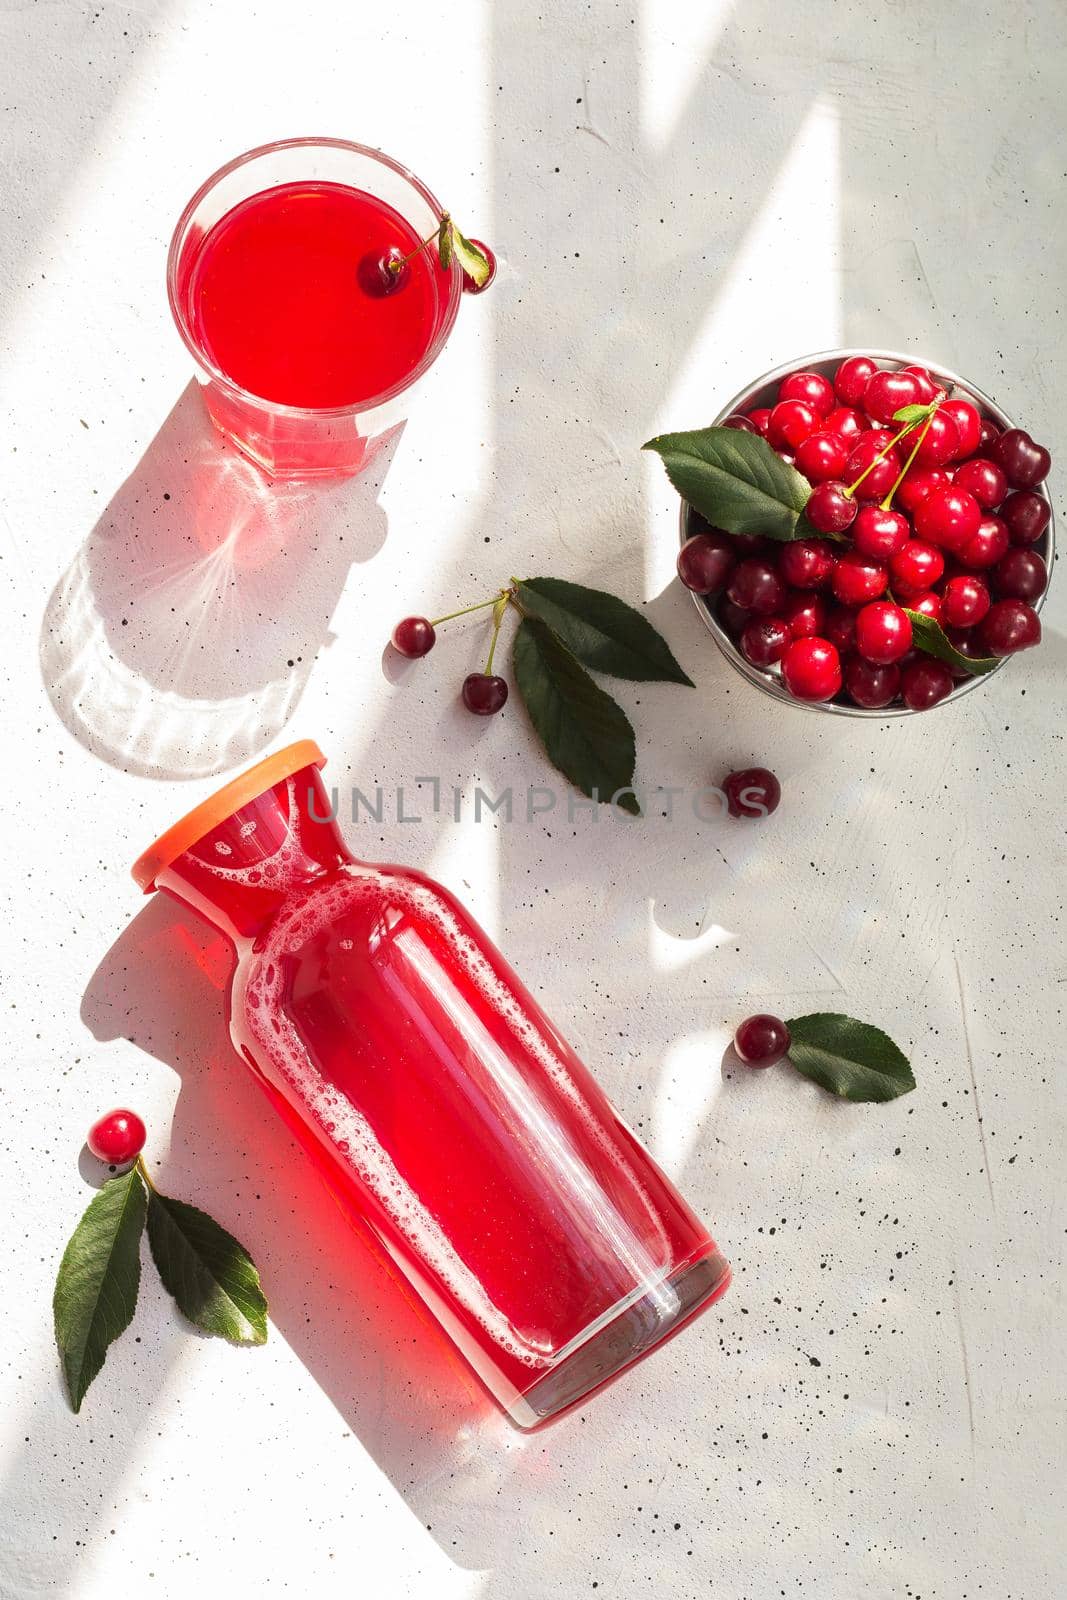 Cold cherry juice in a glass and bottle with ripe berries. Top view. The concept of summer refreshing drink morse or kompot. by lara29